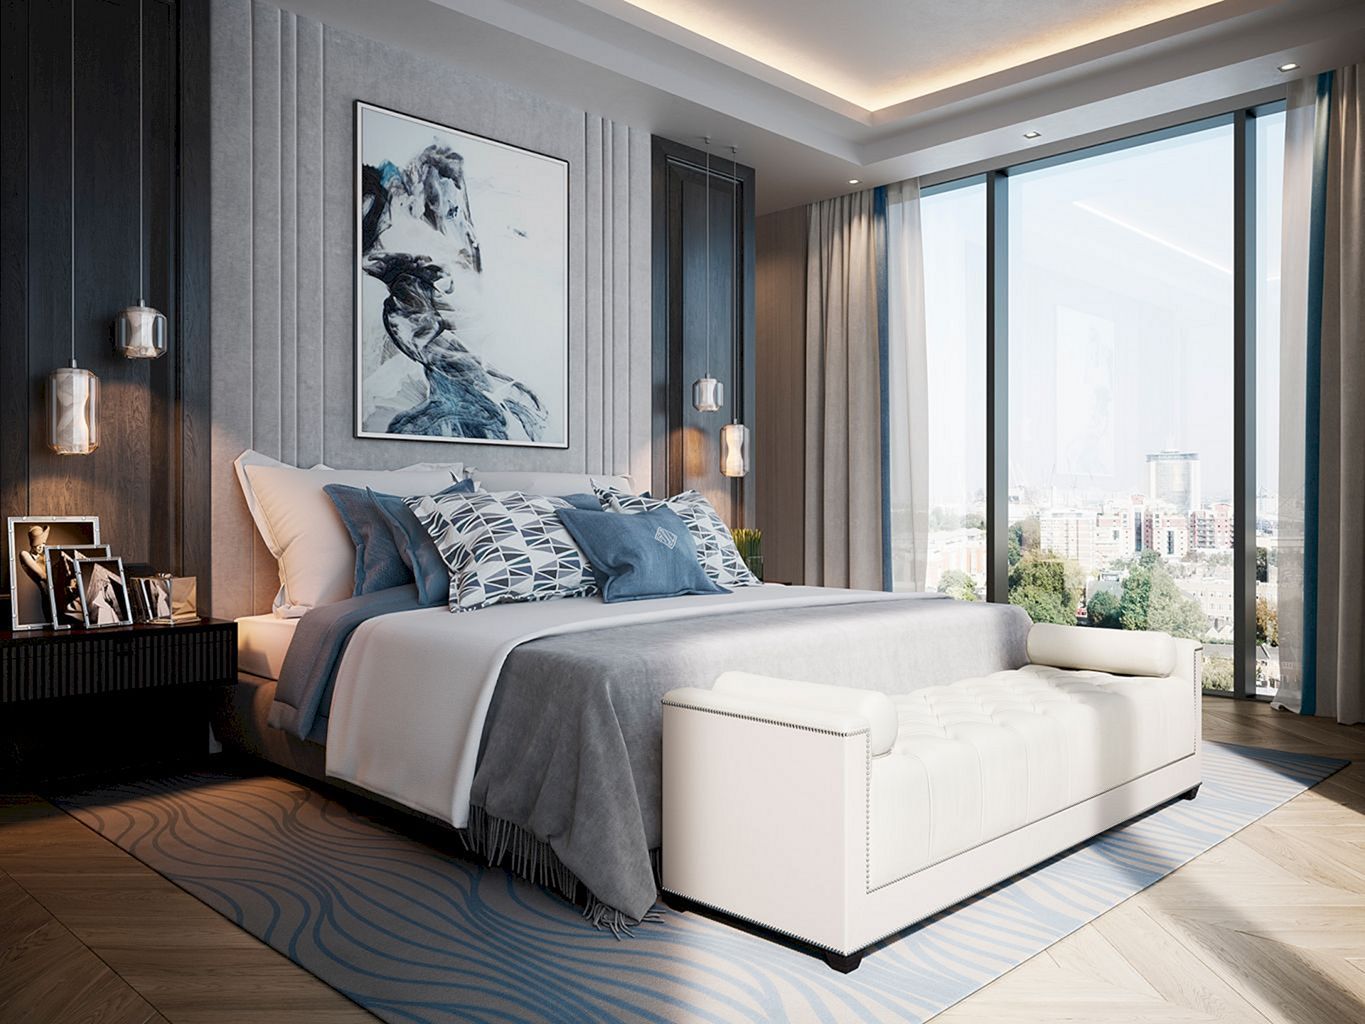 Luxury Modern Bedroom Design: Room that reflects your rich taste and standards